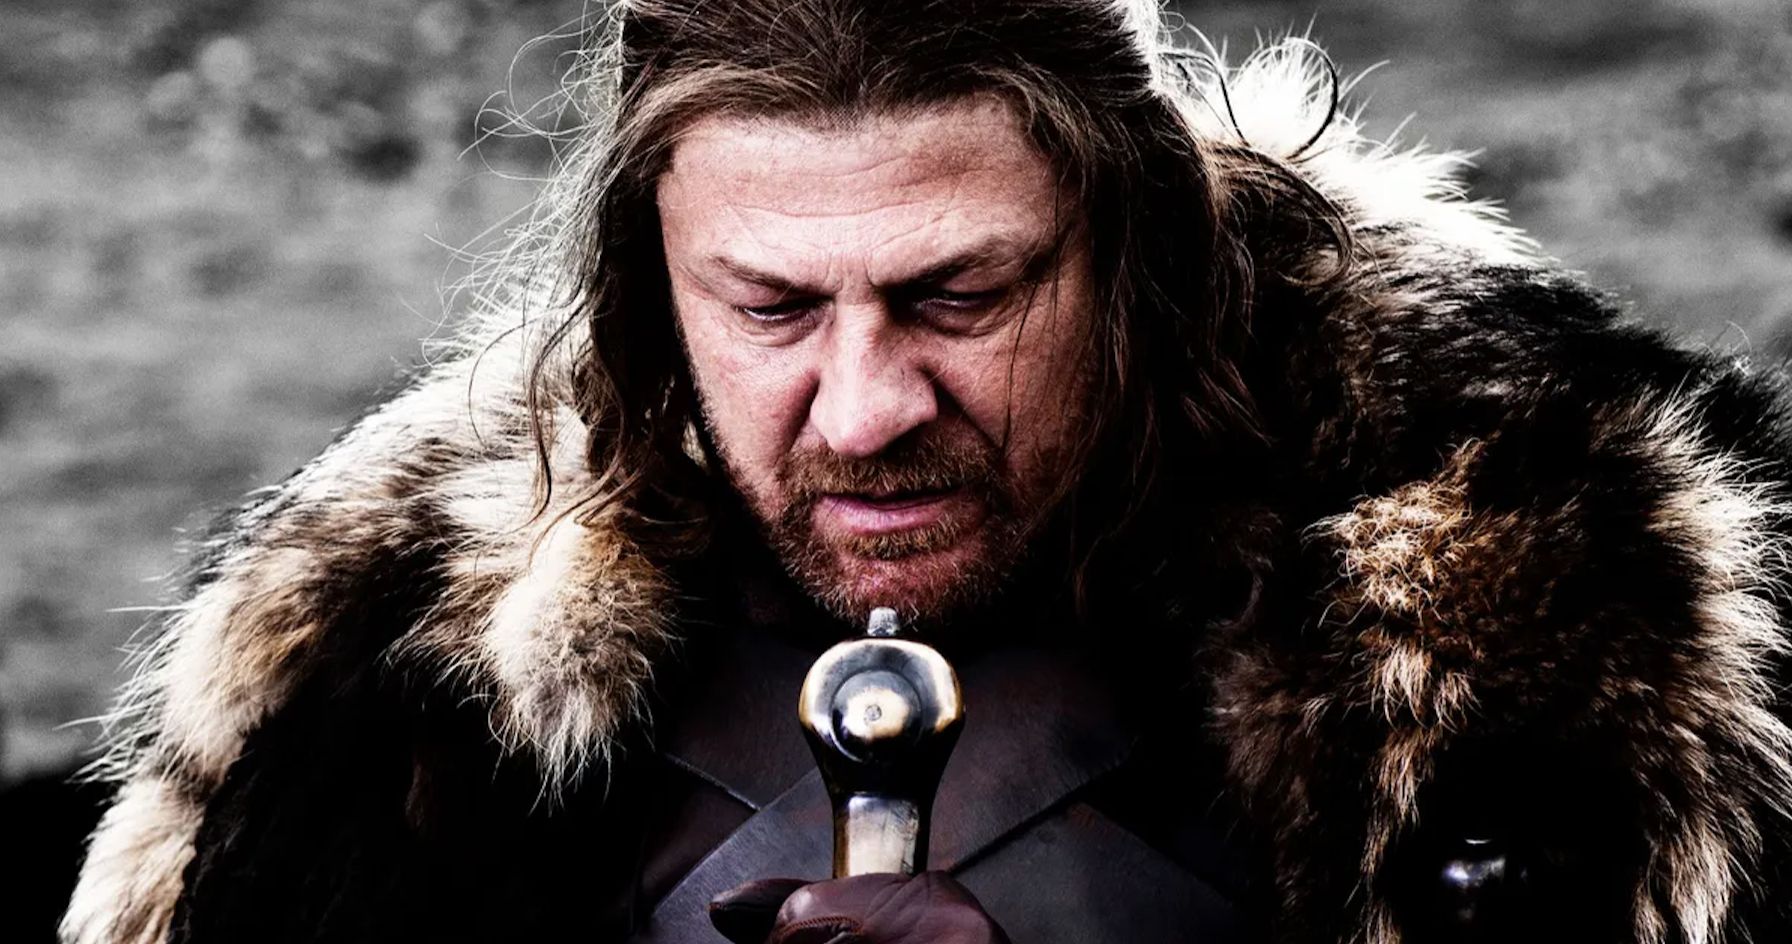 Lord of the Rings &amp; Game of Thrones Fans Celebrate Sean Bean on His 62nd Birthday